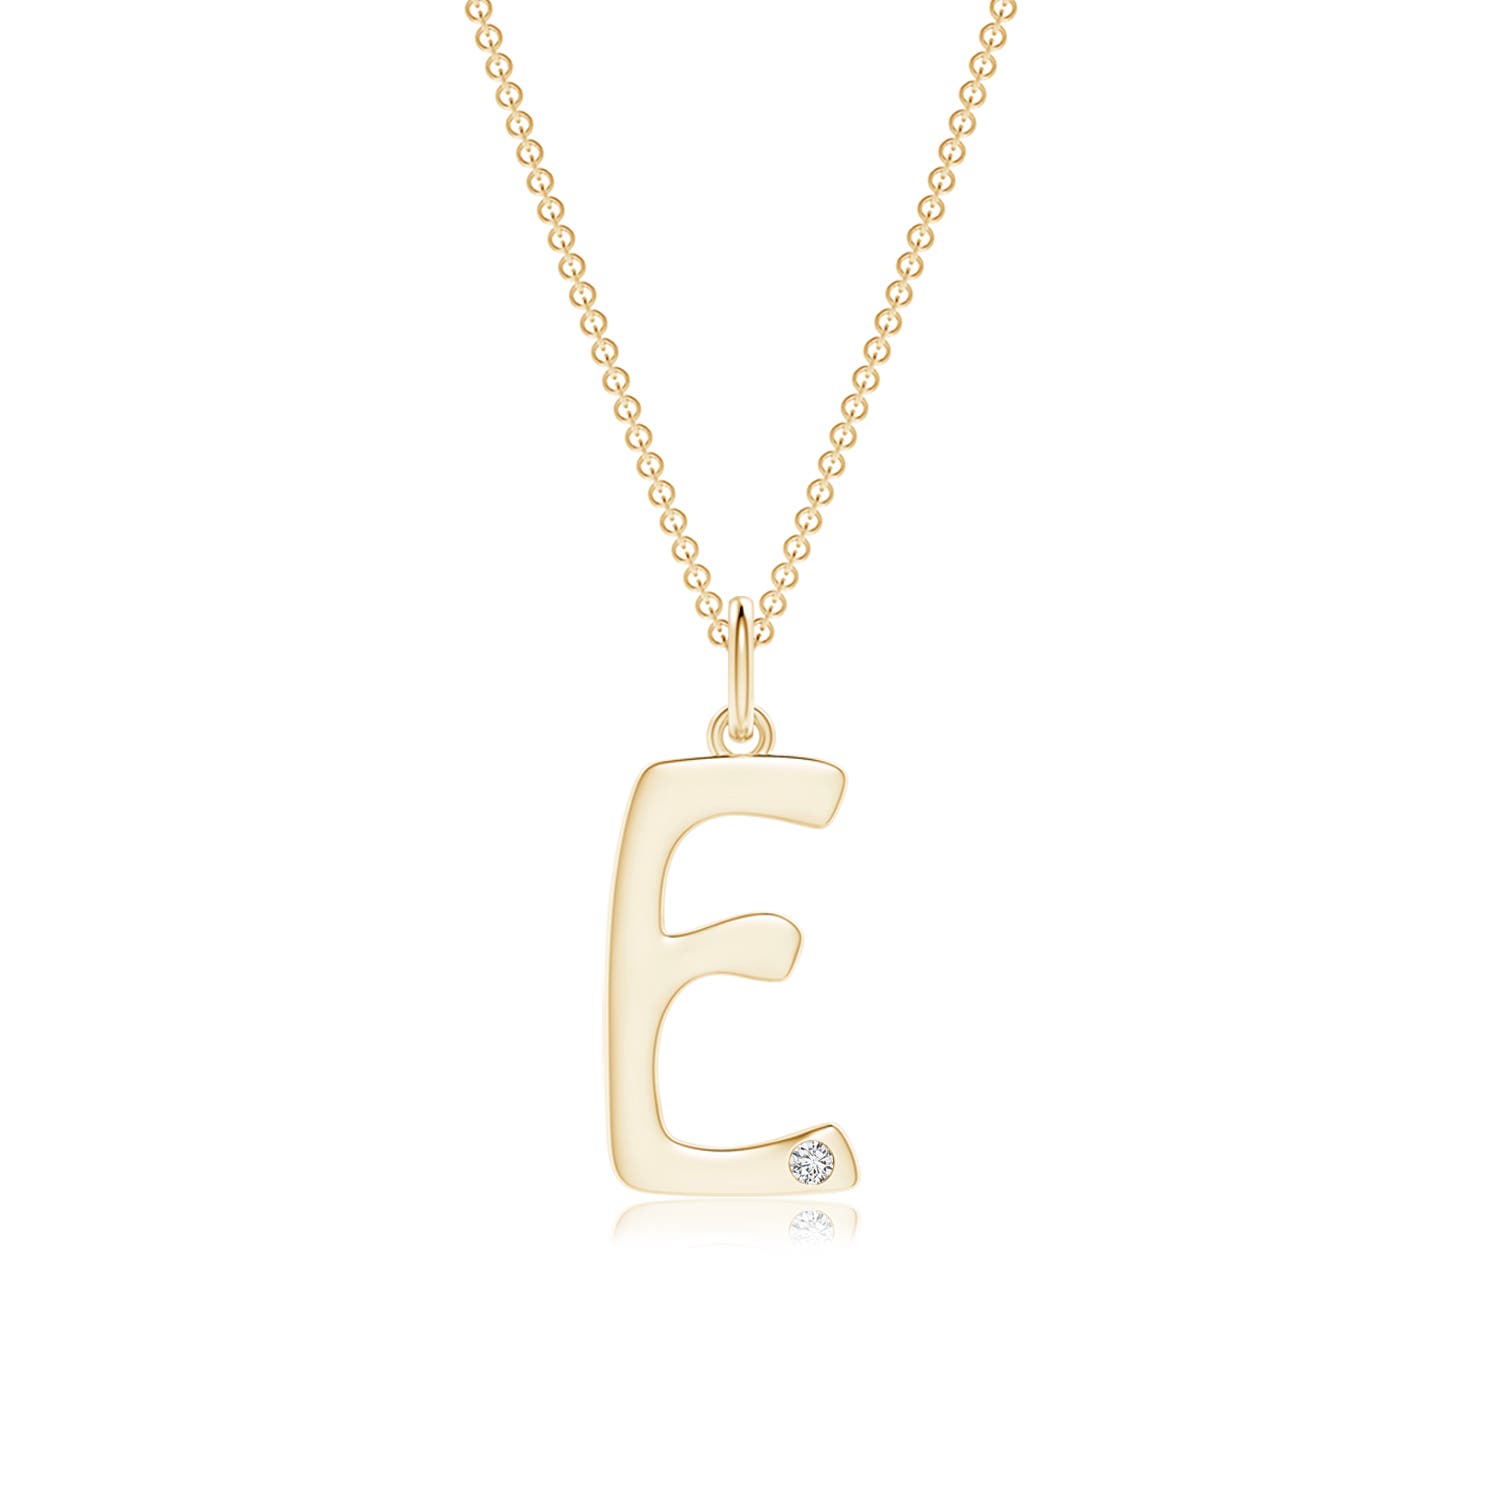 H, SI2 / 0.01 CT / 14 KT Yellow Gold